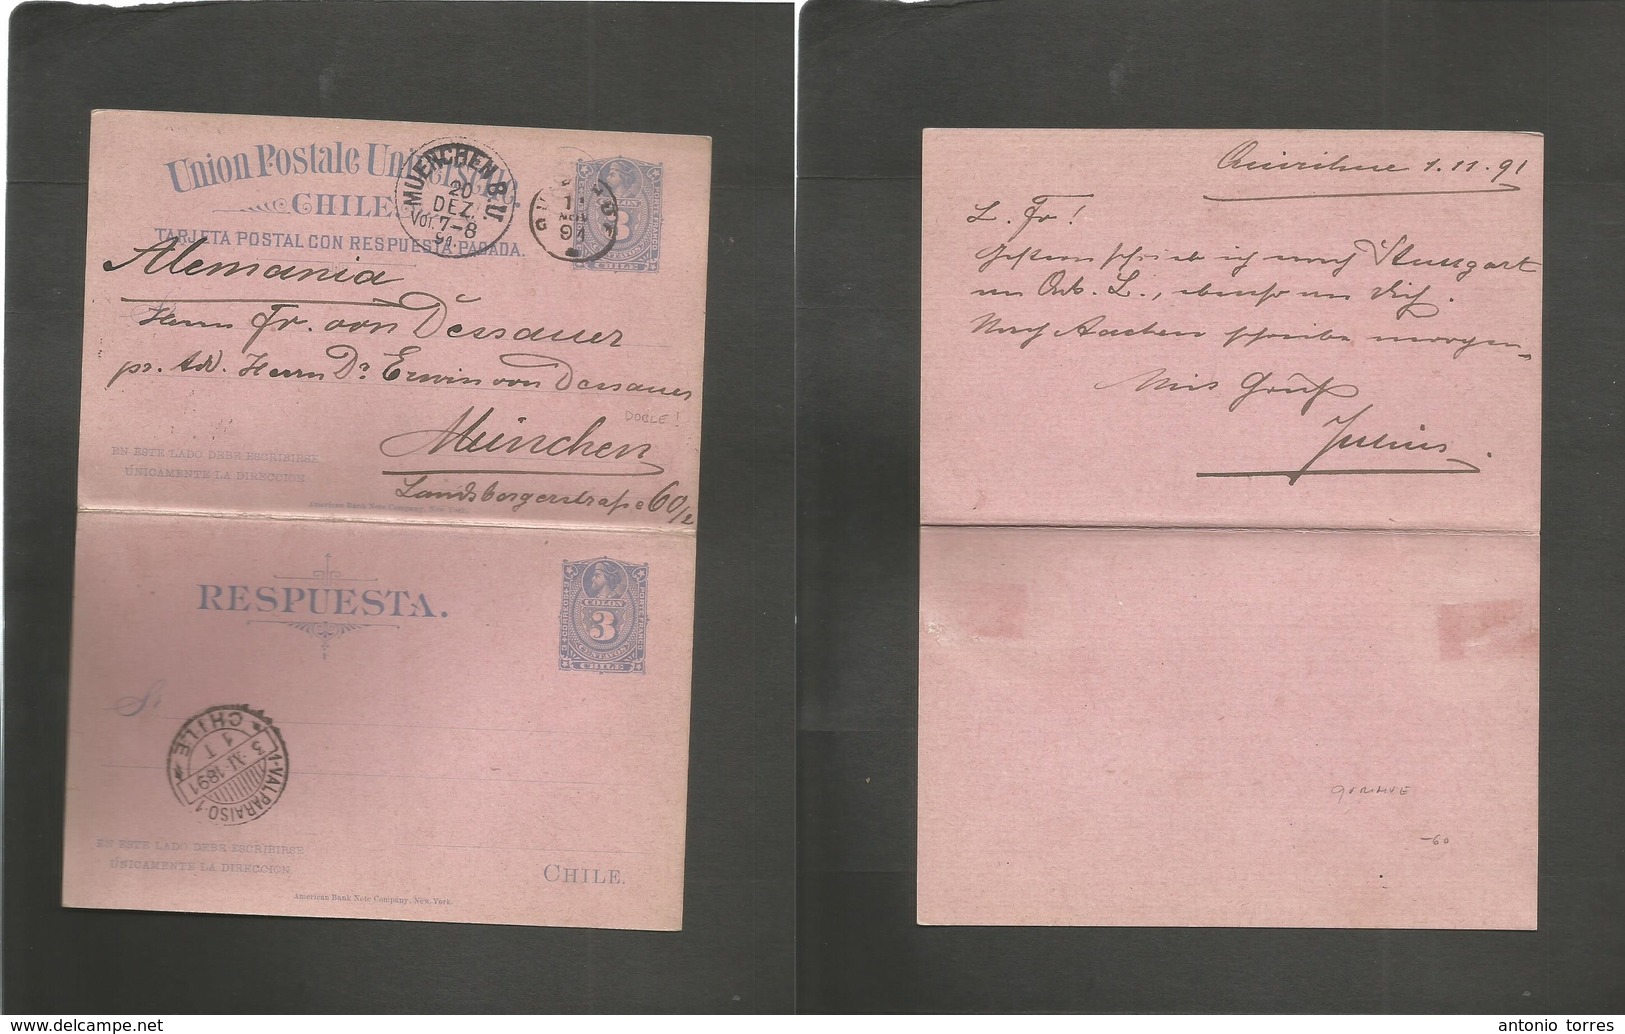 Chile - Stationery. 1891 (1 Nov) Quirihue - Germany, Munich (20 Dec) 3c Blue / Pinkish Doble Stat At Card, Missed On Way - Chile